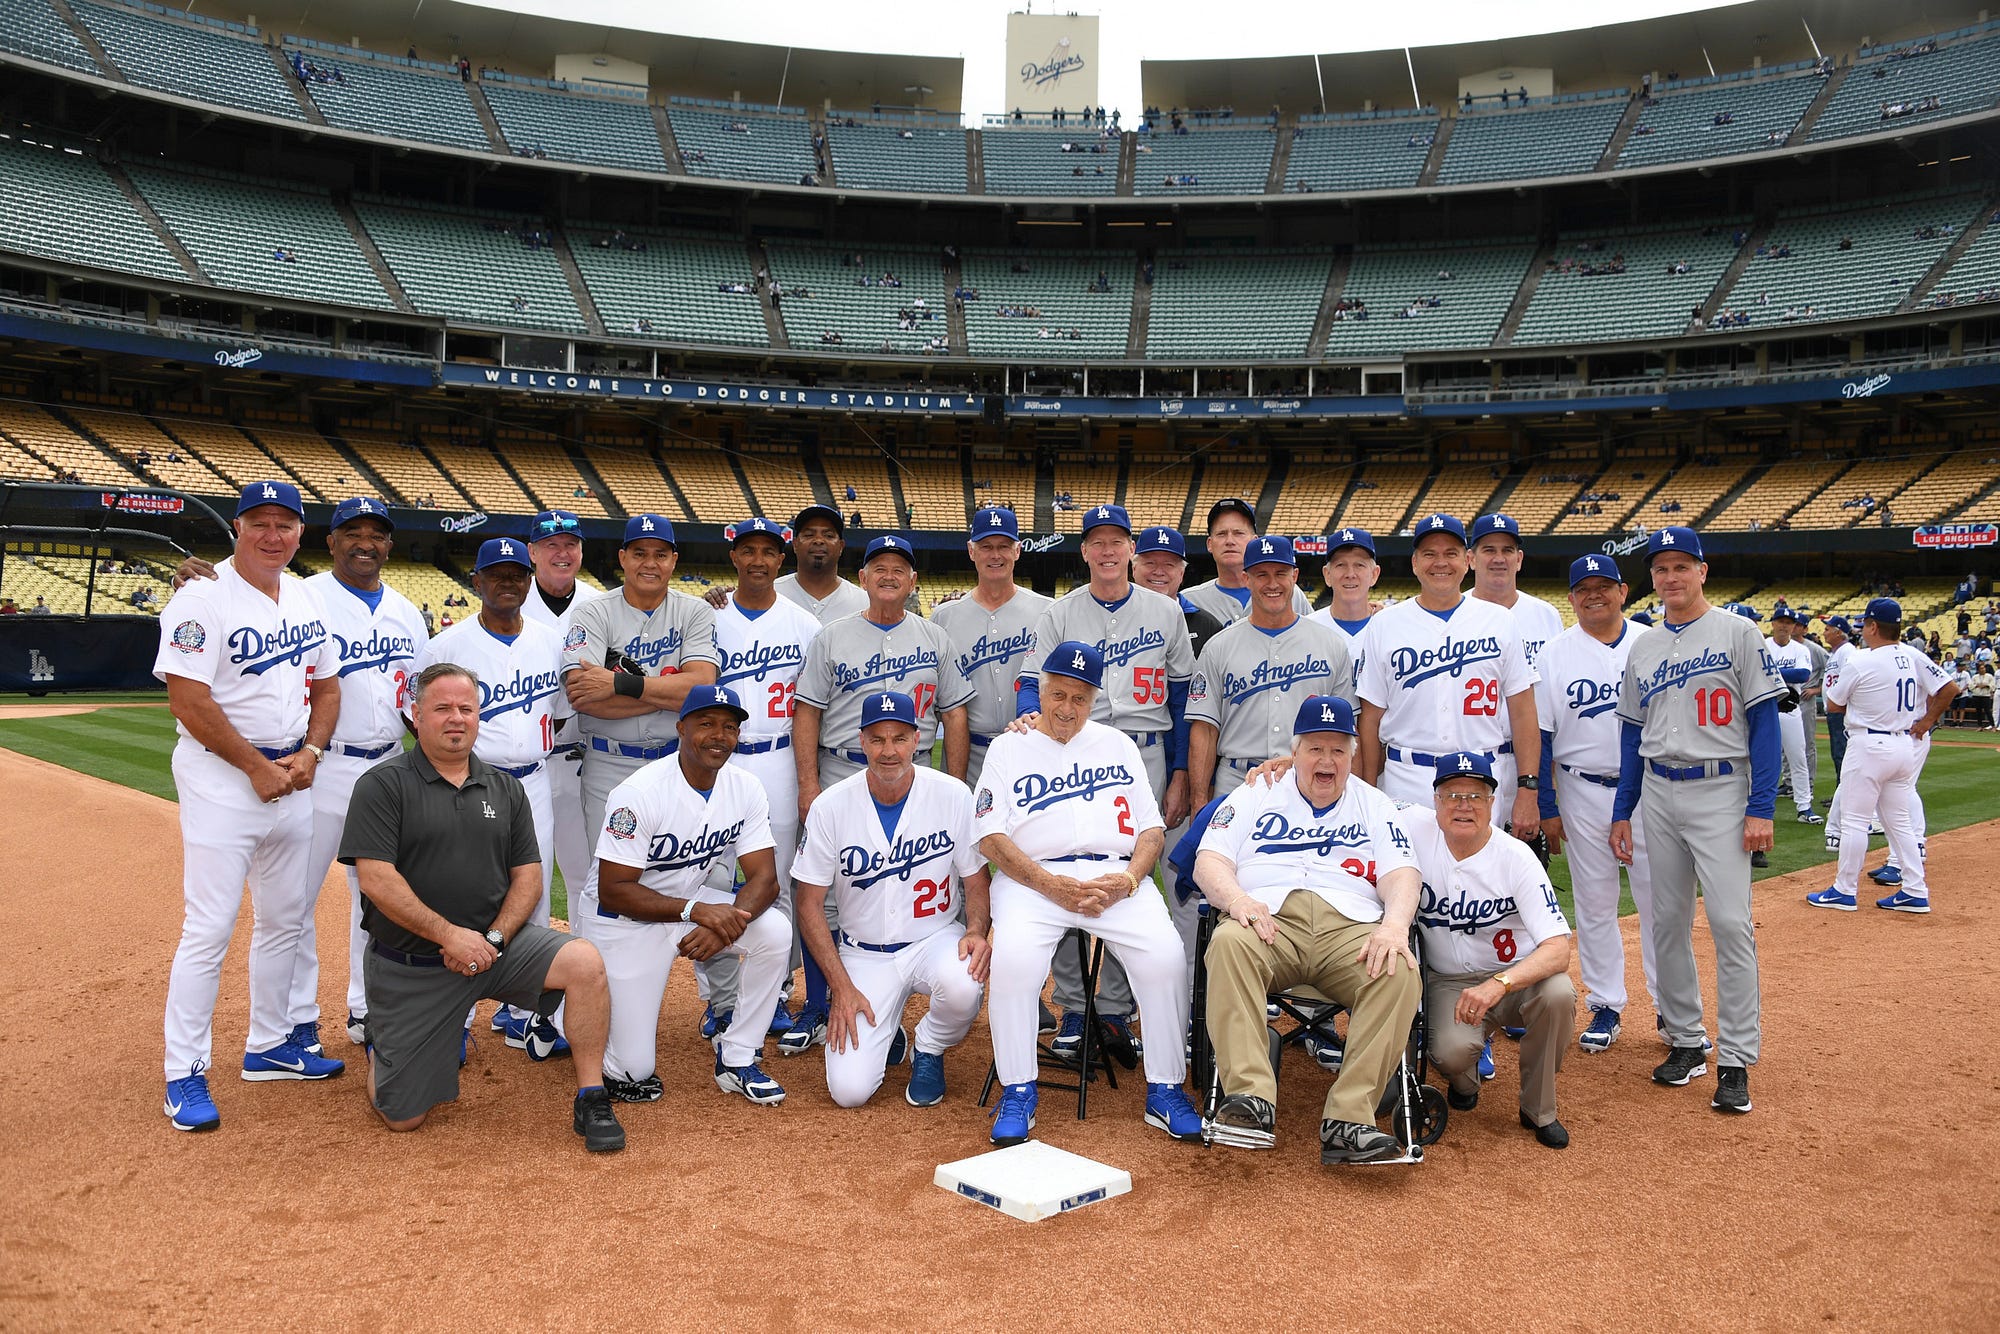 Dodgers celebrate 30th anniversary of 1988 champions at Alumni Game, by  Rowan Kavner